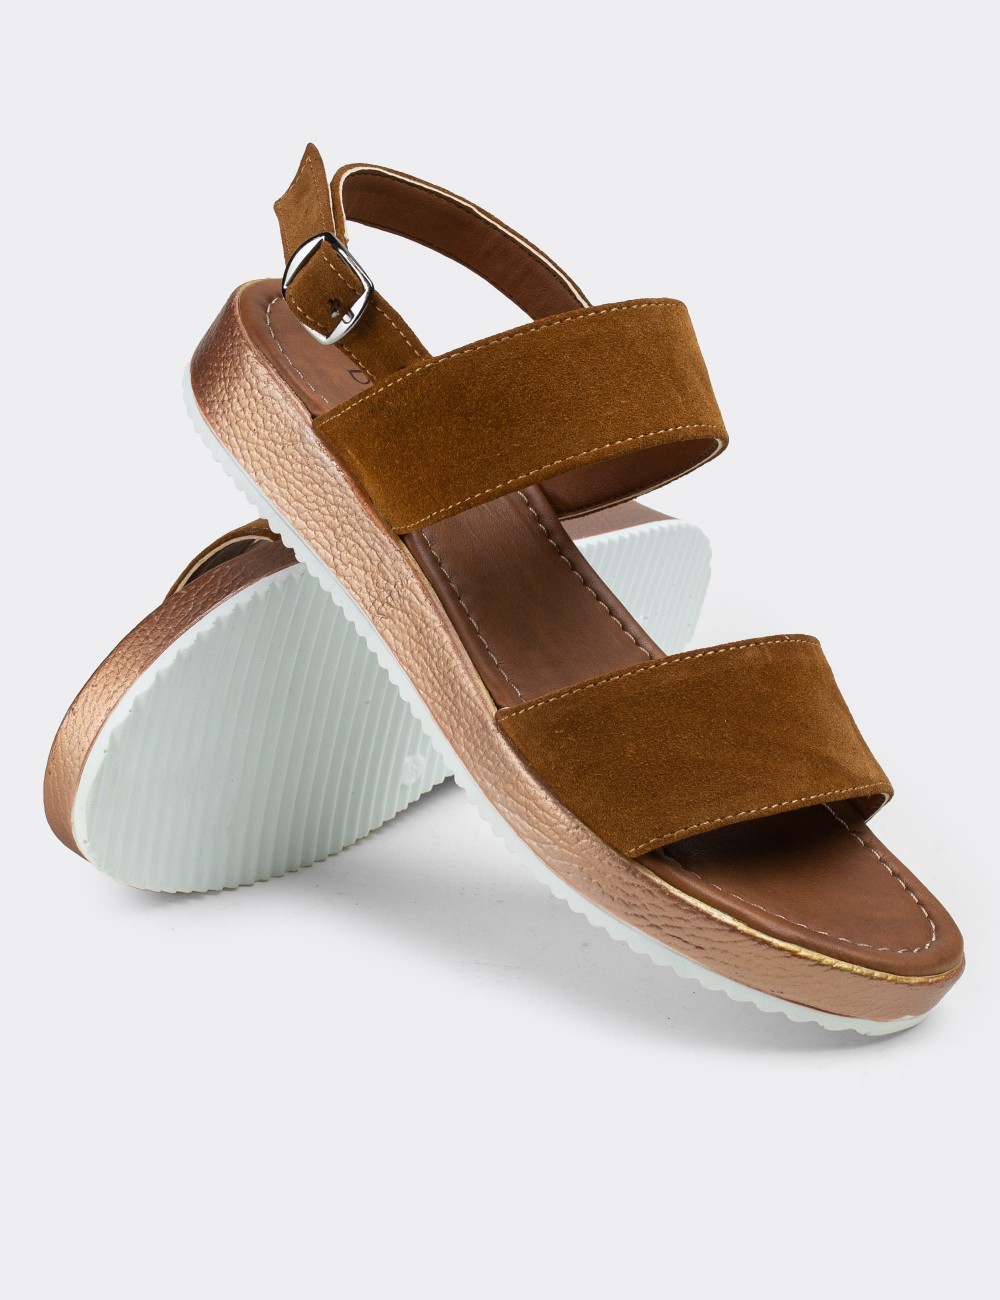 Tan Suede Leather Sandals - 02120ZTBAC03